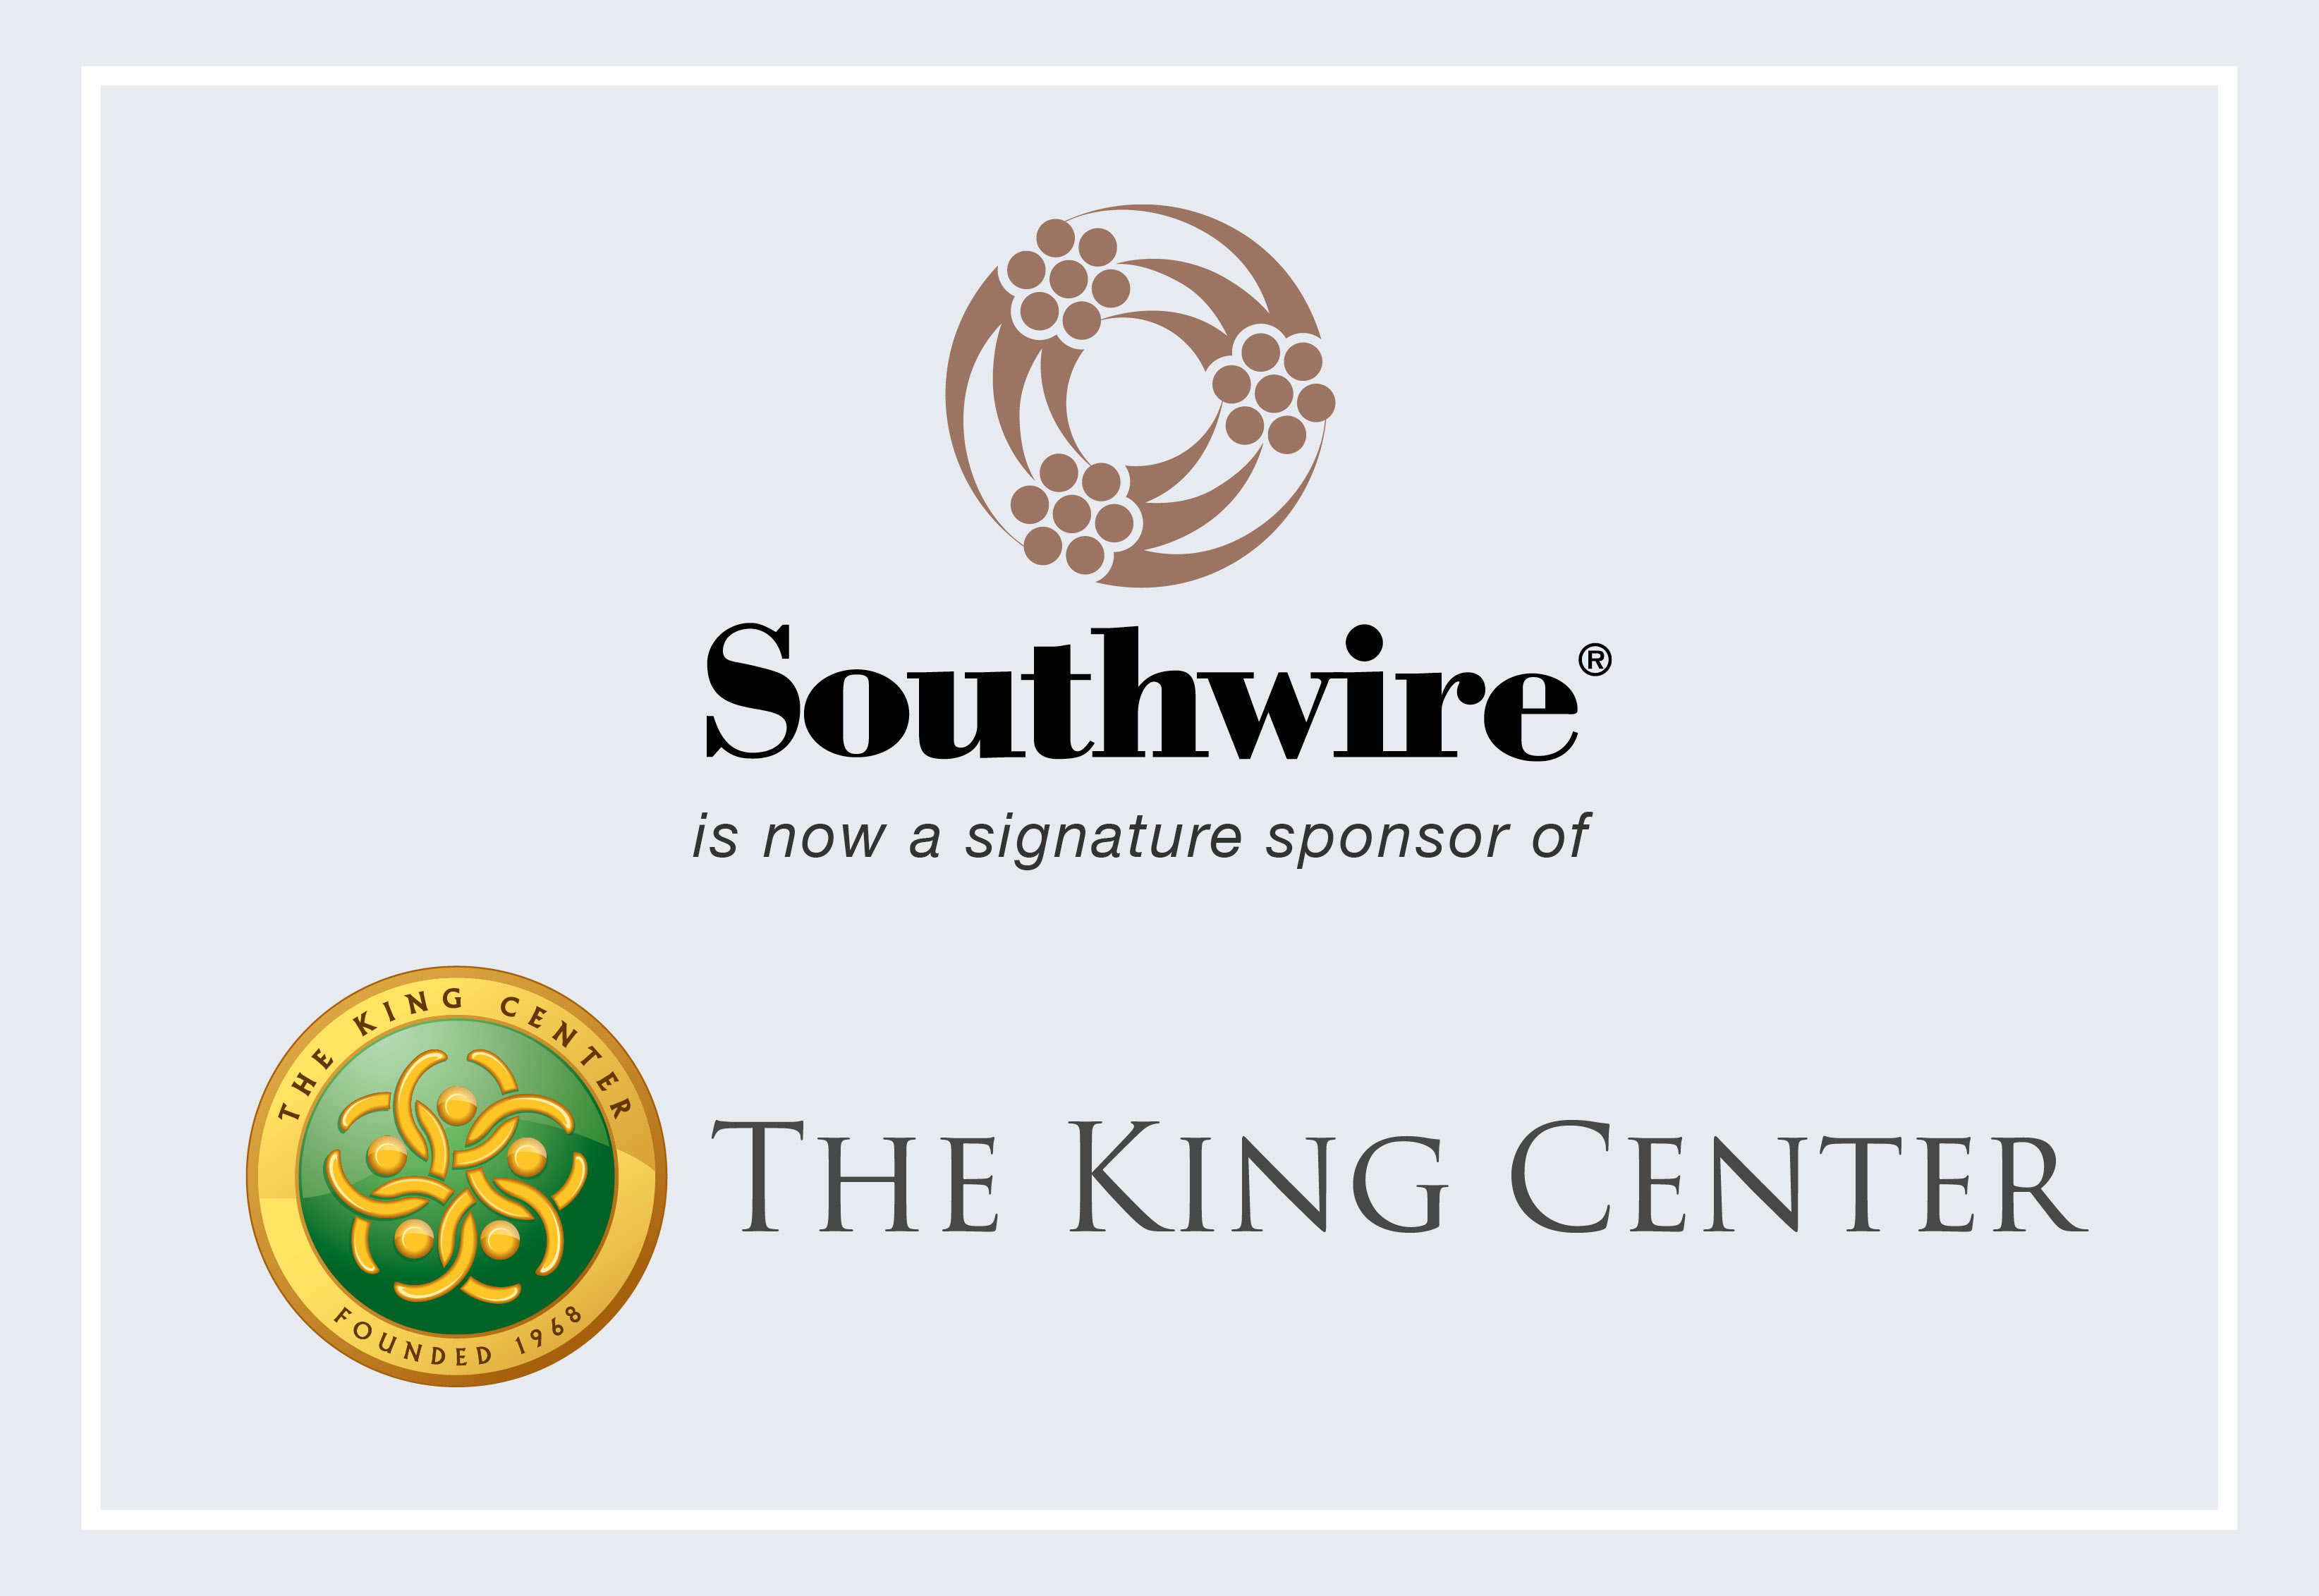 Southwire Partners with the King Center in Honor of MLK’s Legacy